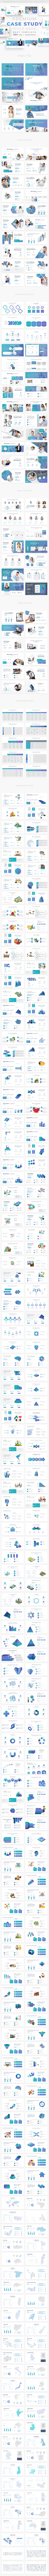 Case Study Pitch Deck Powerpoint Template